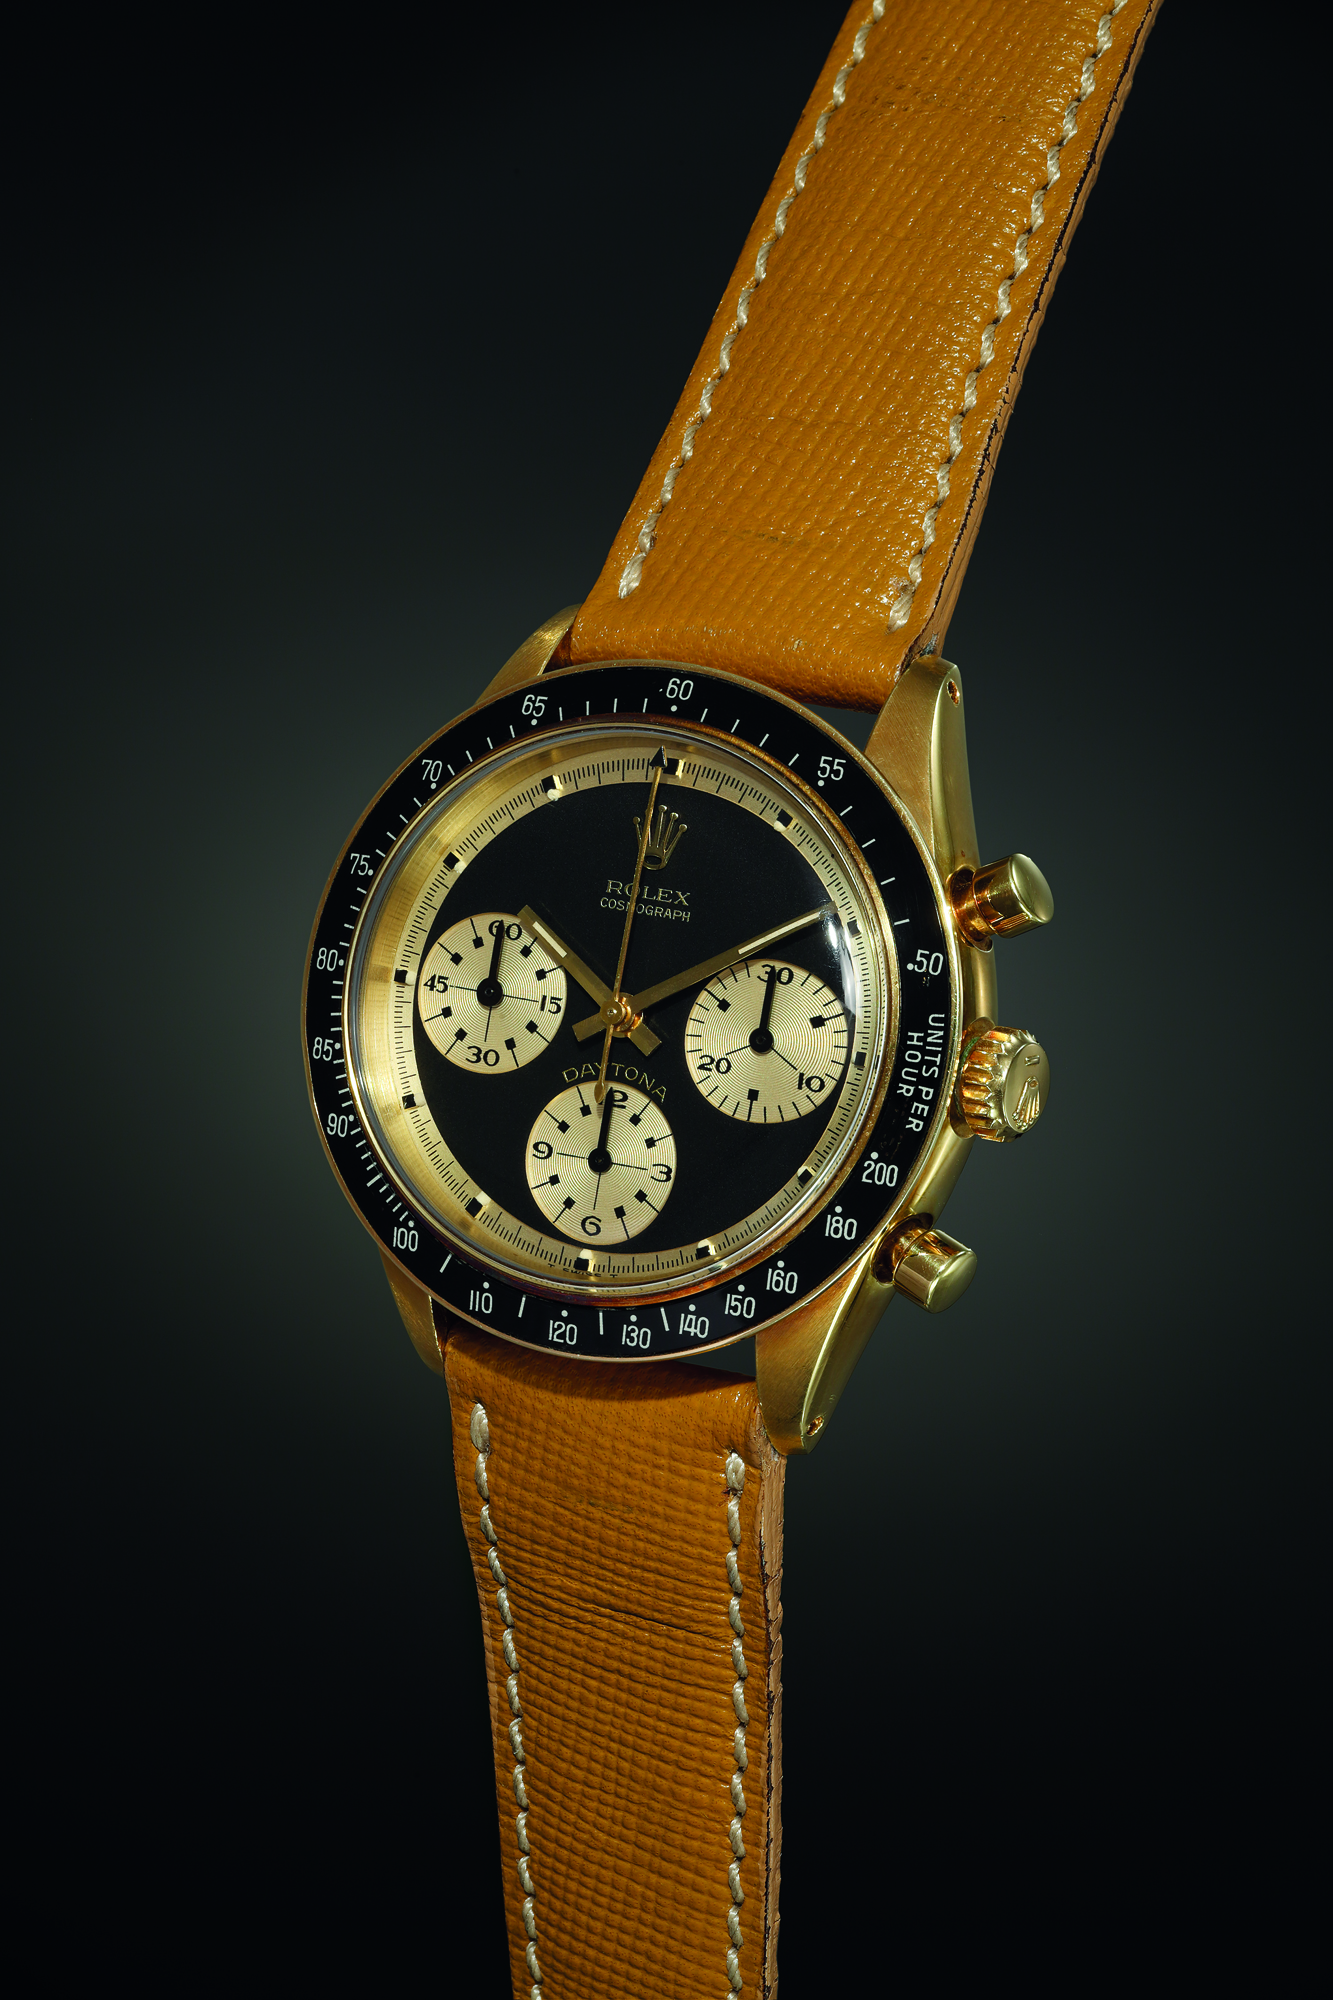 An exceedingly rare and outstandingly beautiful yellow gold chronograph wristwatch with black ‘Paul Newman’ dial displaying contrasting gold registers. Realised CHF 912,500